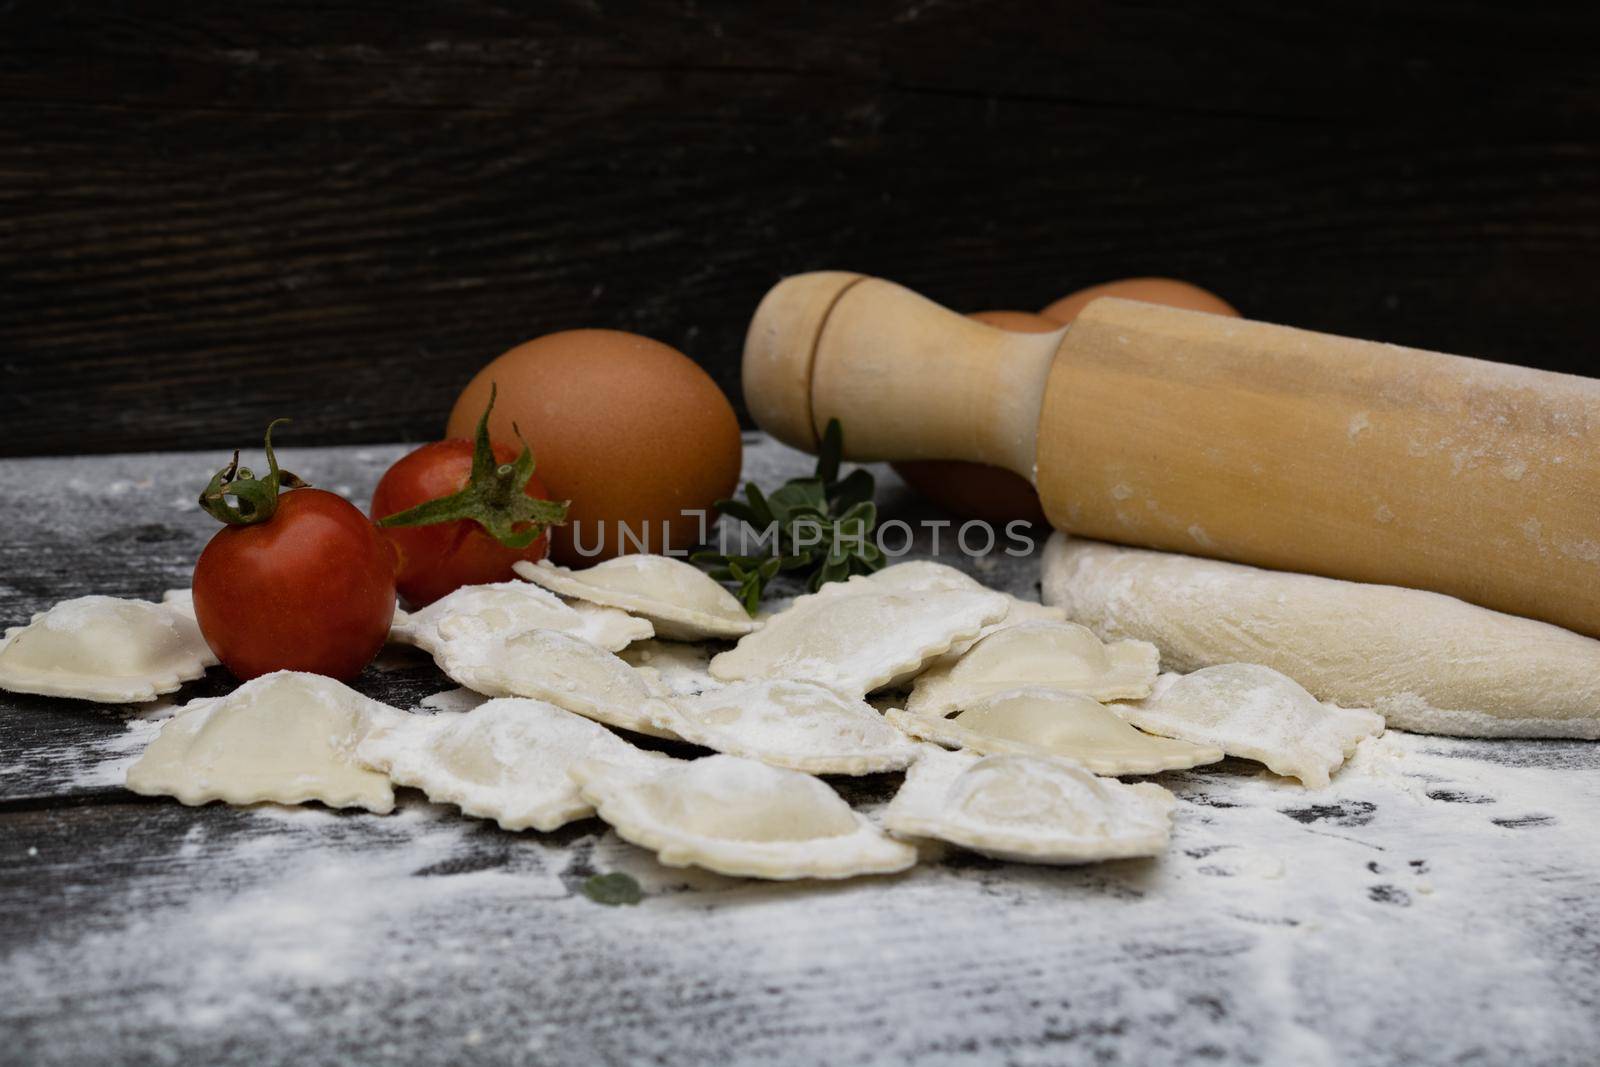 rolling pin with tomatoes, dough, eggs, flour and ravioli on wood